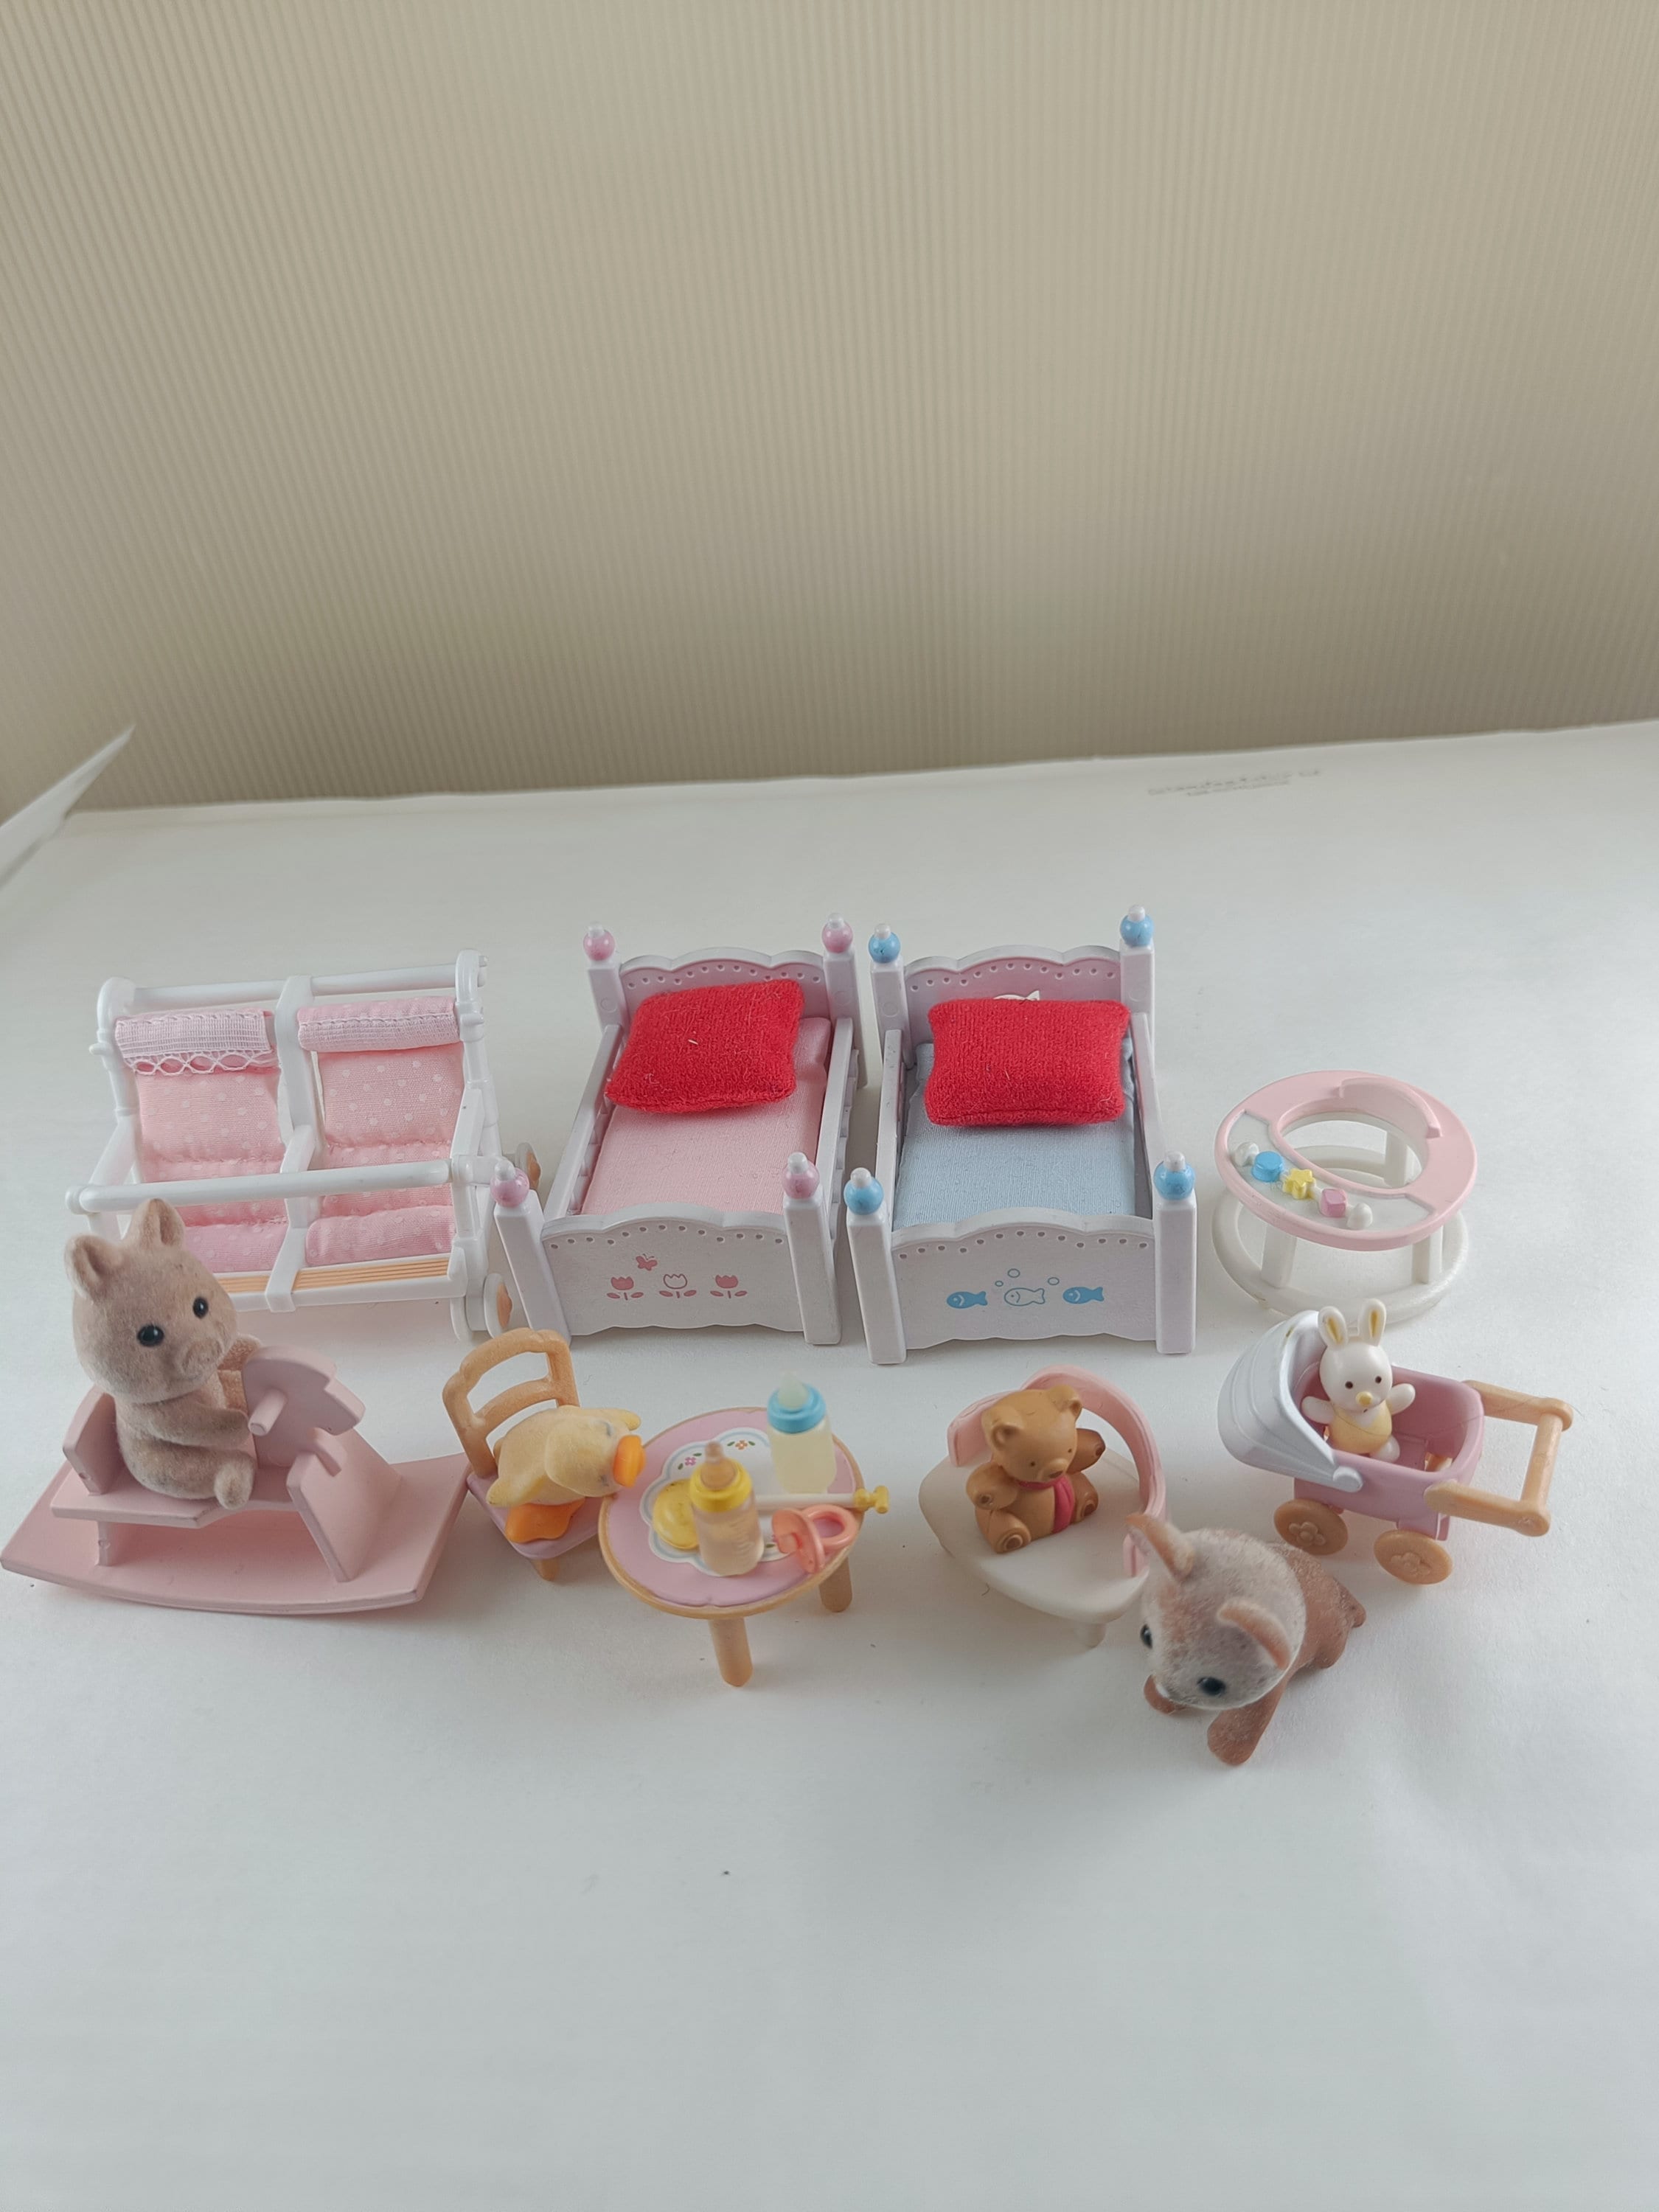 [Used] PANDA FAMILY 2885 Retired Open Hands Sylvanian Families